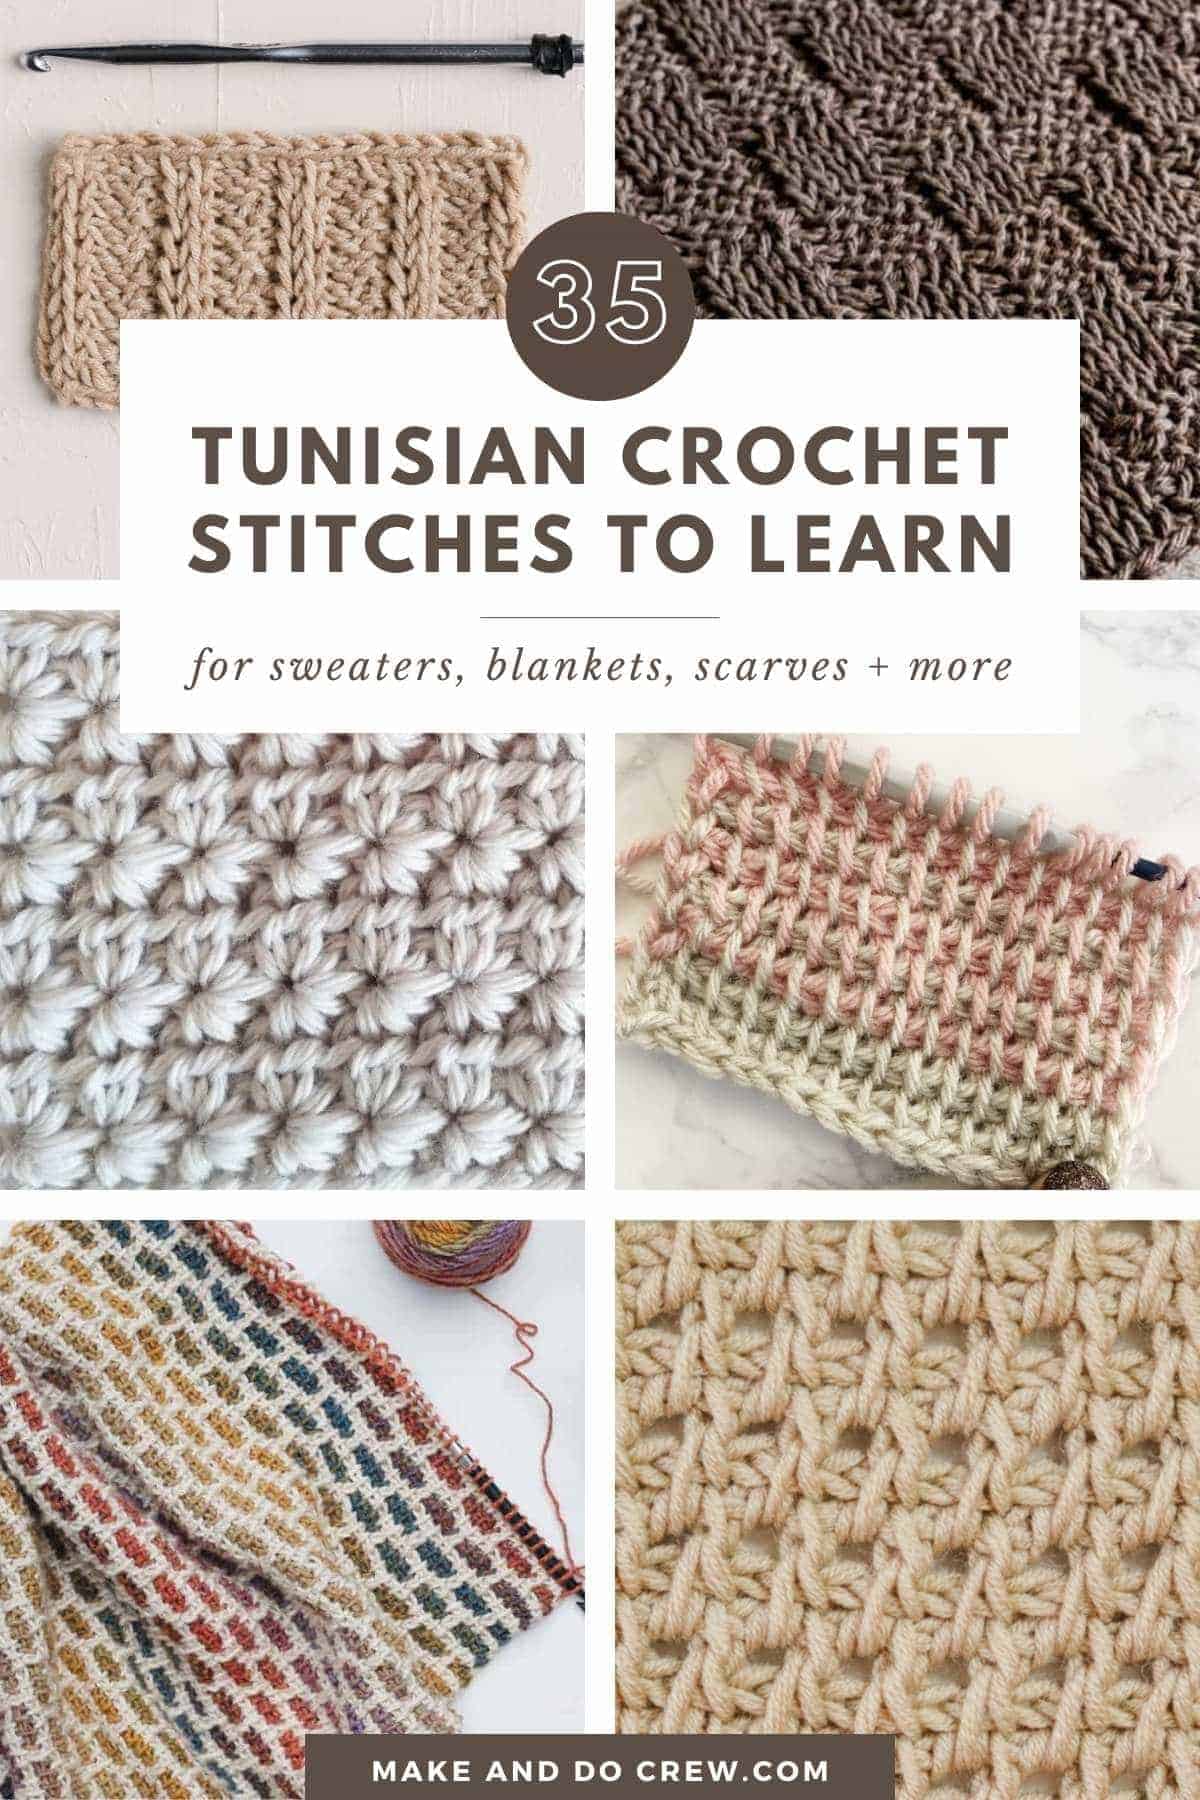 30 Minimalist Crochet Stitches to Try for a Polished Look 